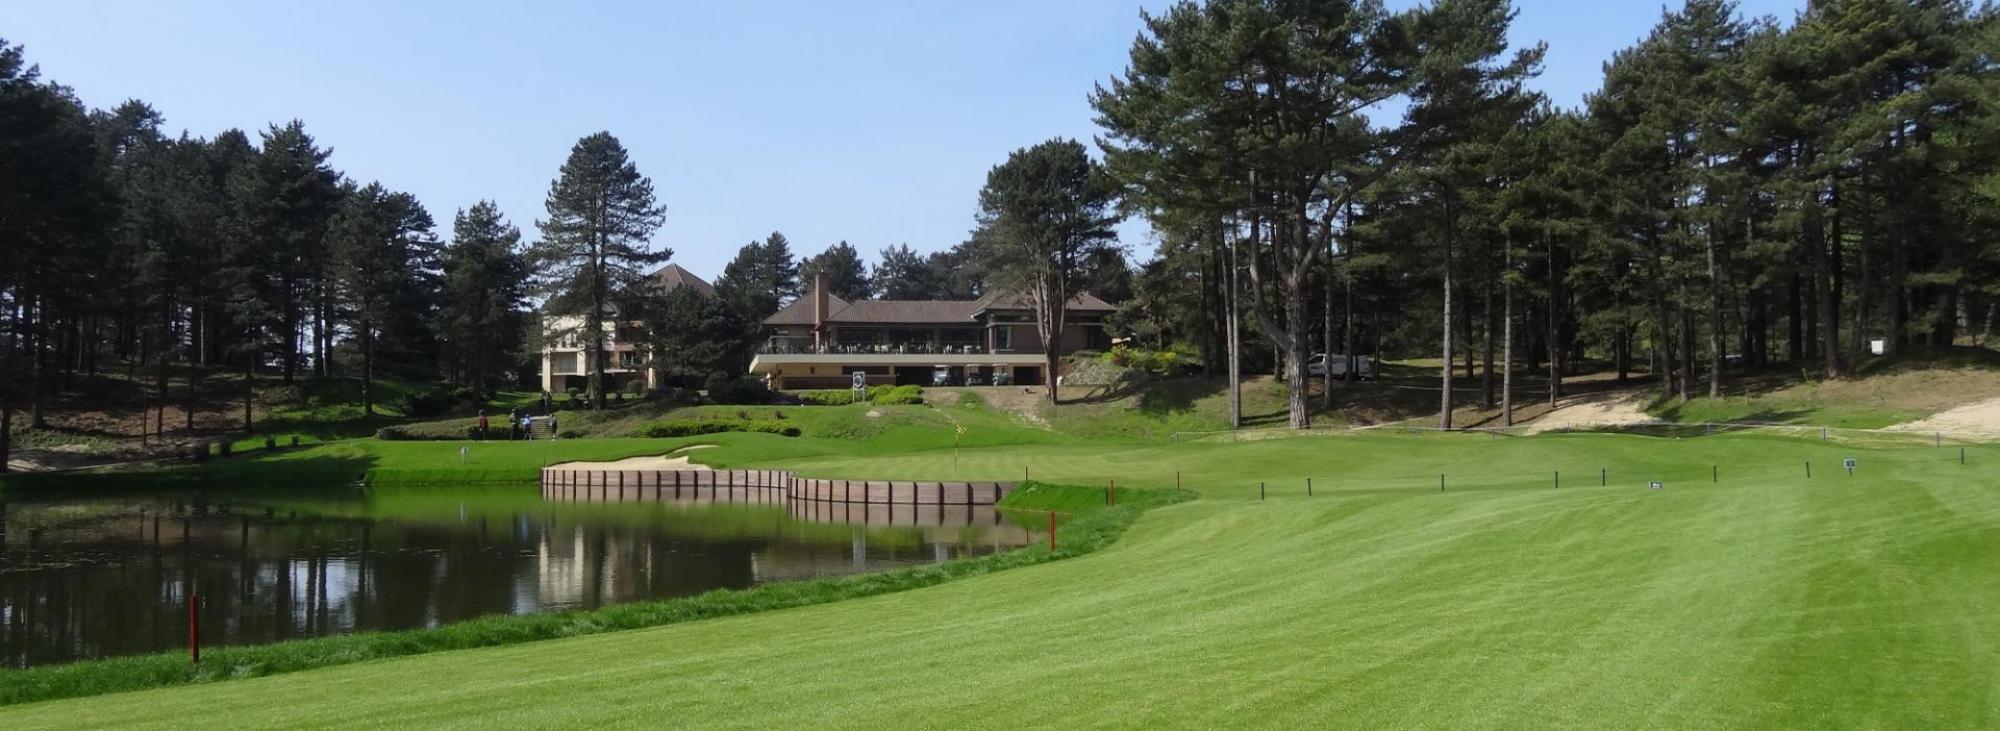 View Golf d Hardelot Les Pins  Les Dunes Courses's scenic golf course situated in gorgeous Northern 